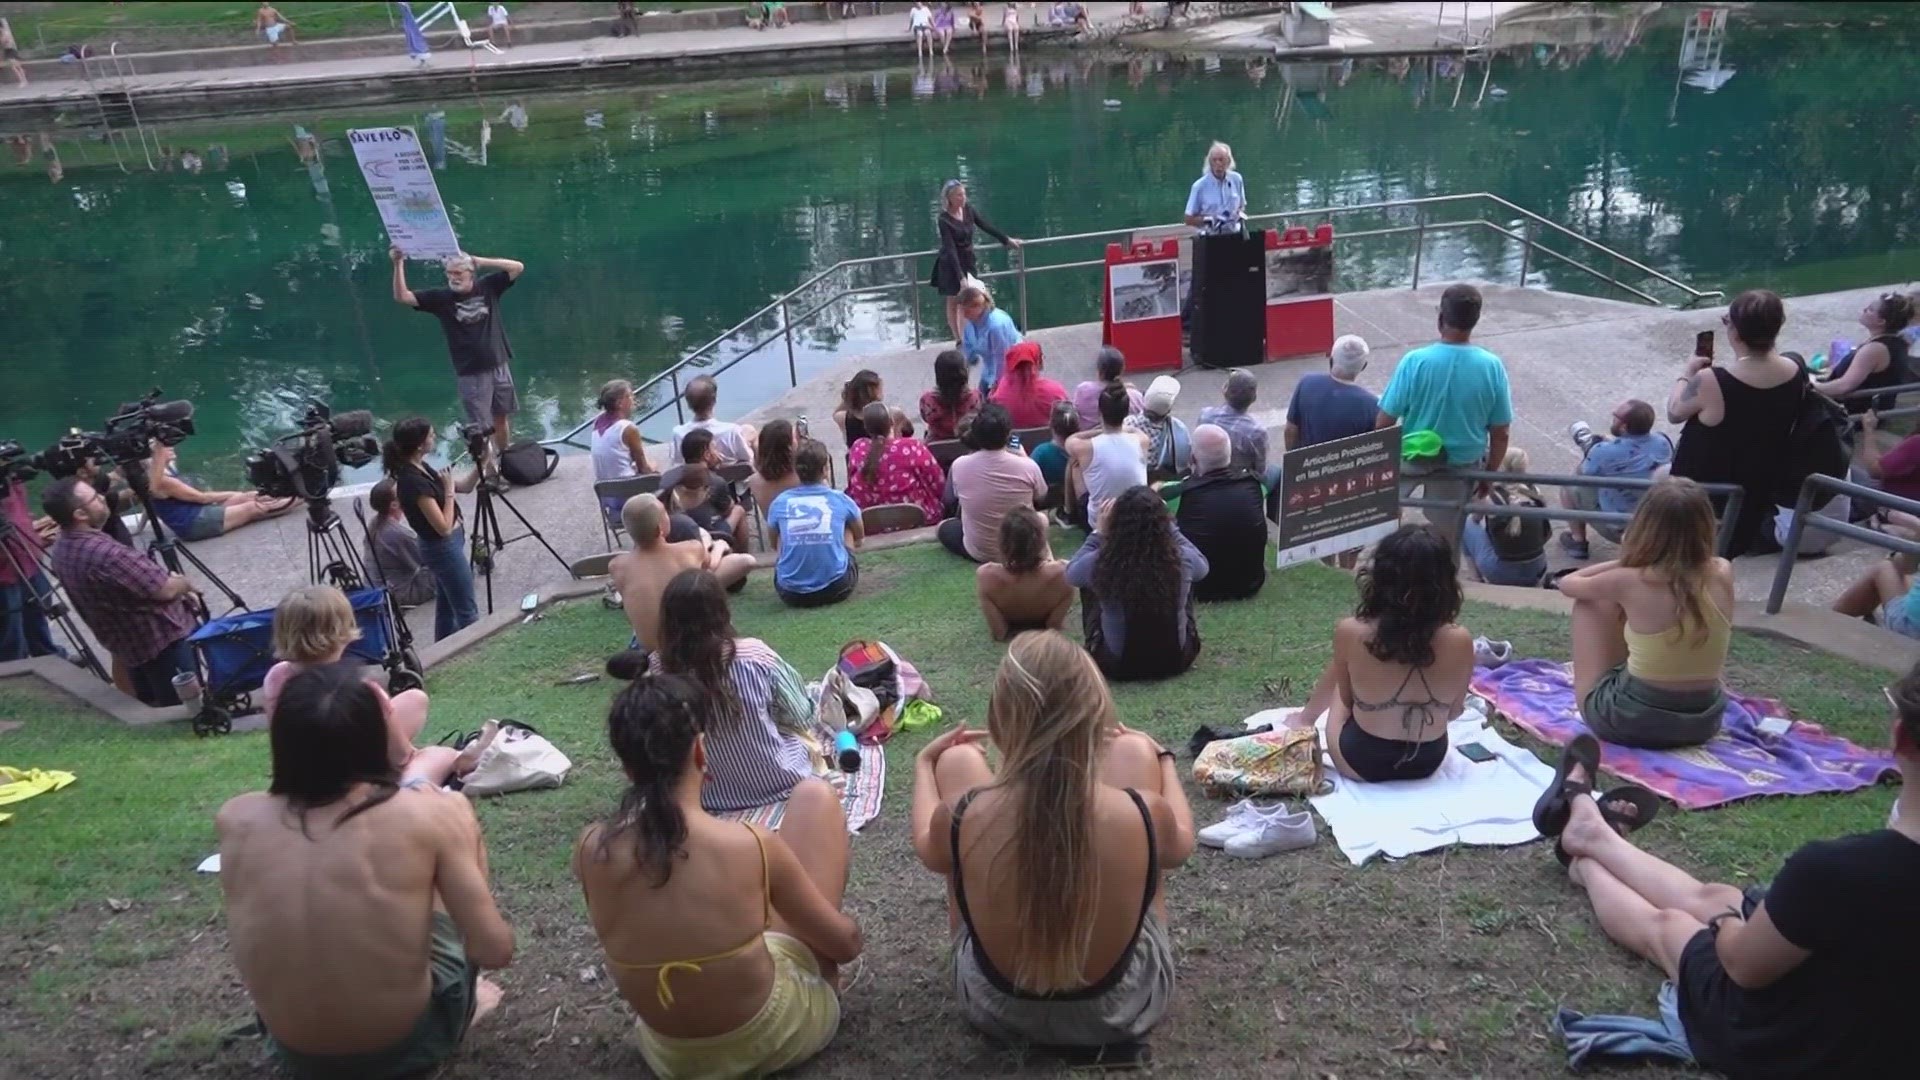 A popular tree at Barton Springs Pool is coming down. Austin's Parks and Rec Department held a Celebration of Life for Flo before the tree is removed.